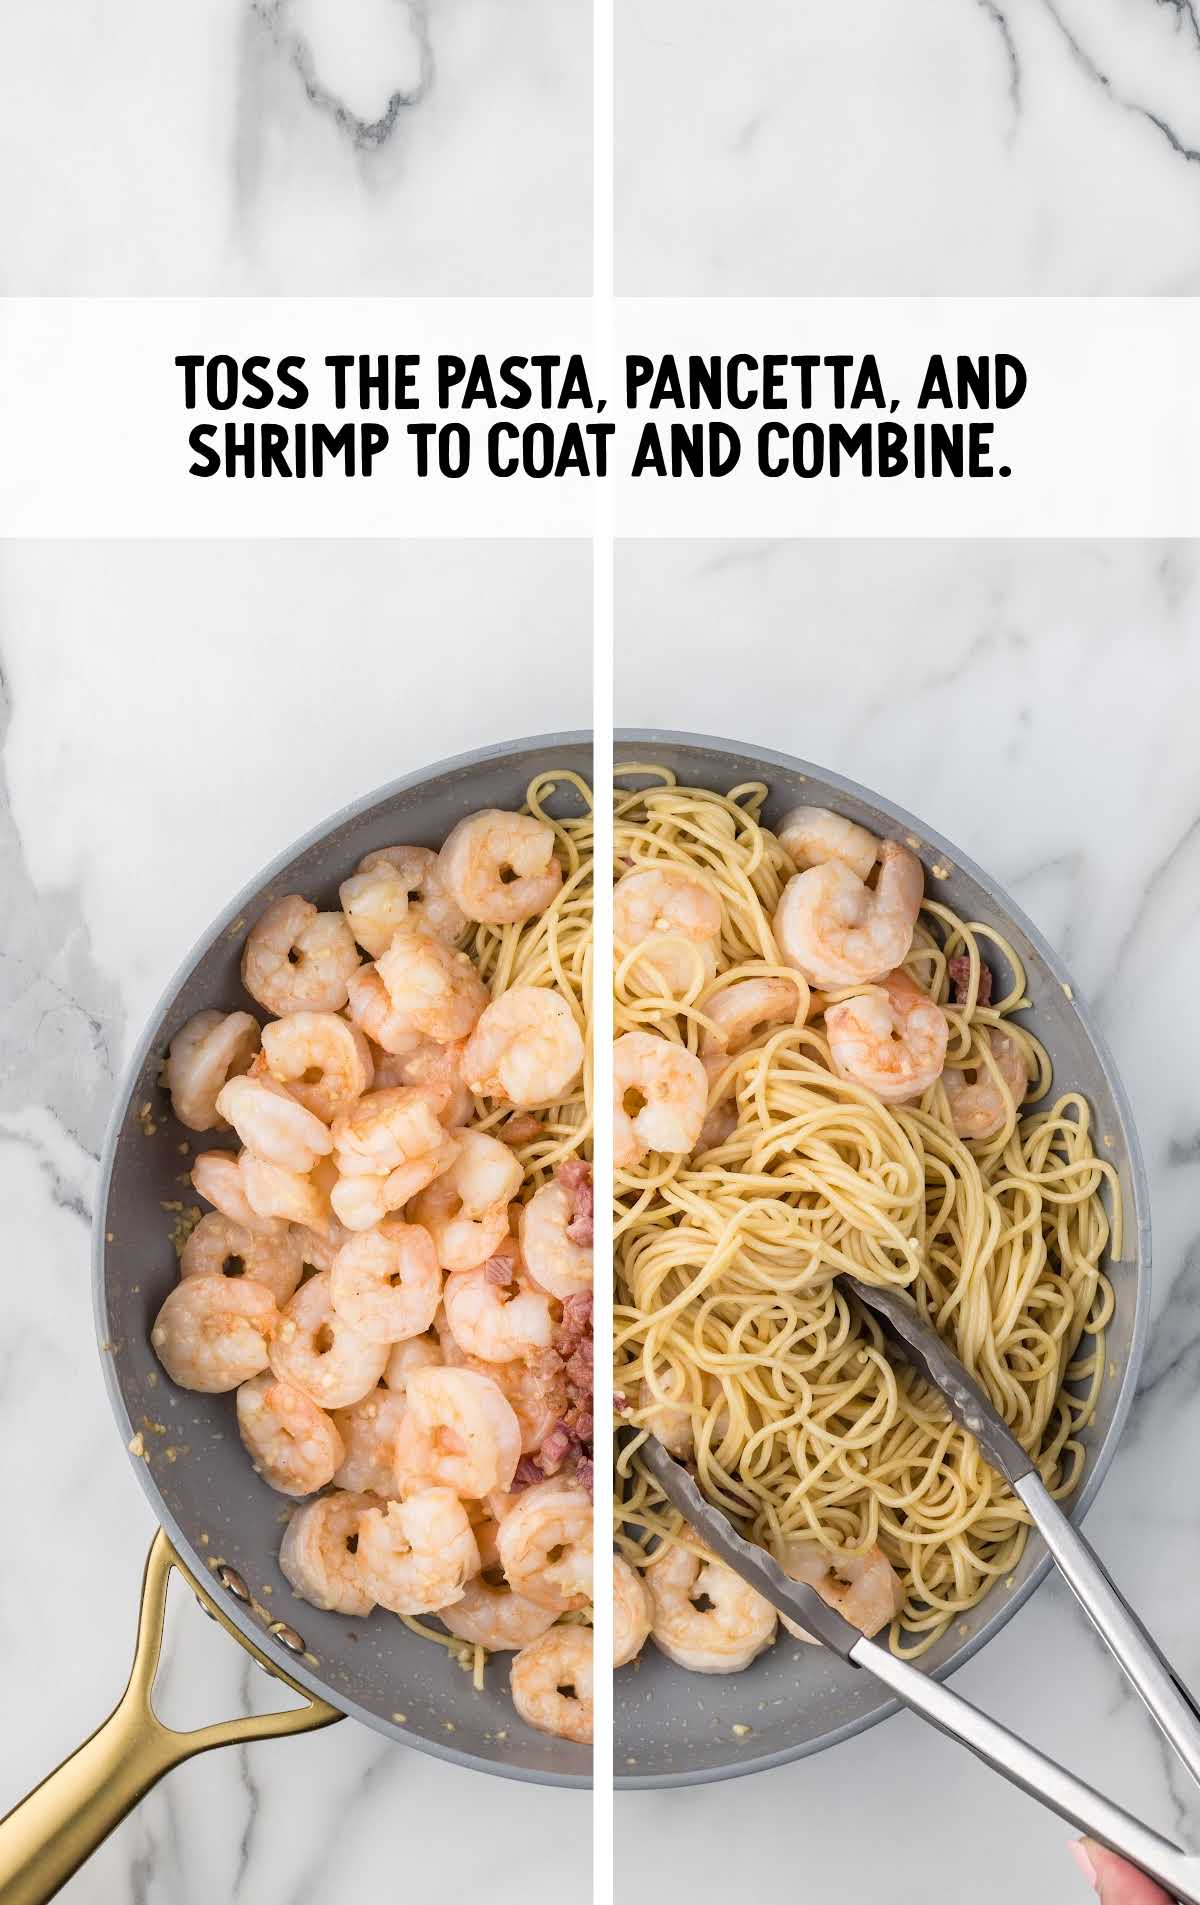 pasta, pancetta, and shrimp tossed and combined in a skillet